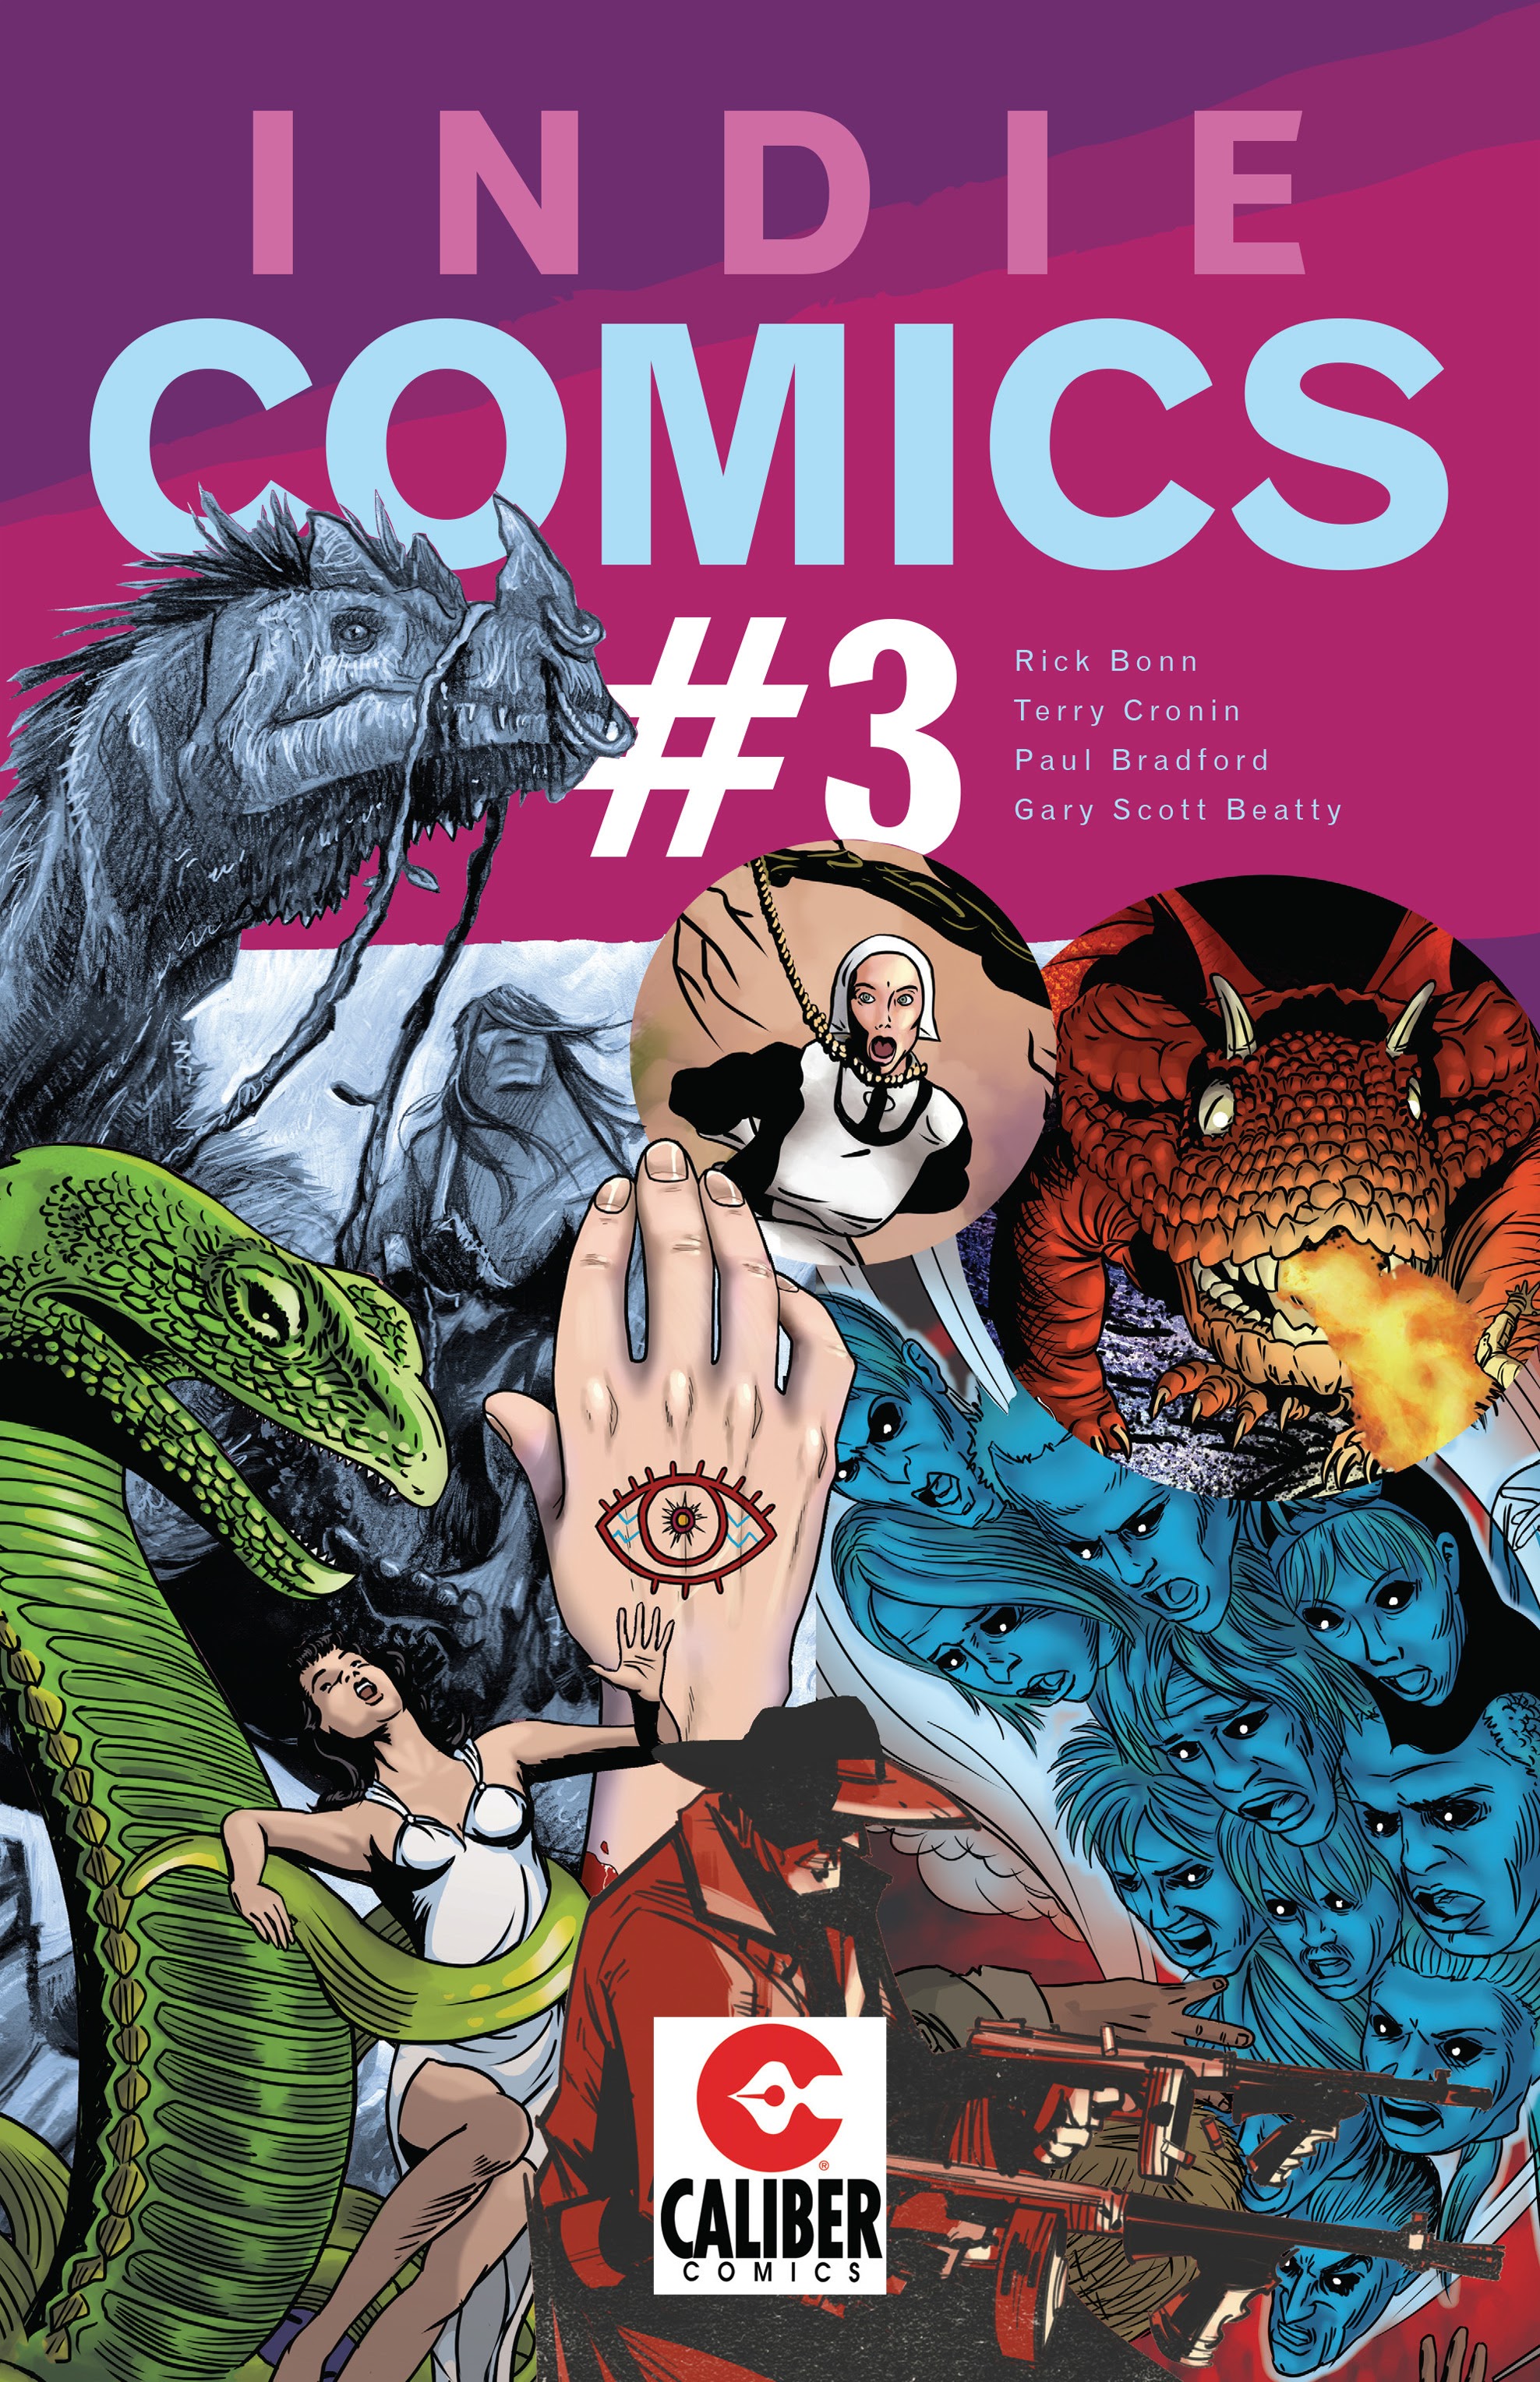 Read online Indie Comics comic -  Issue #3 - 1